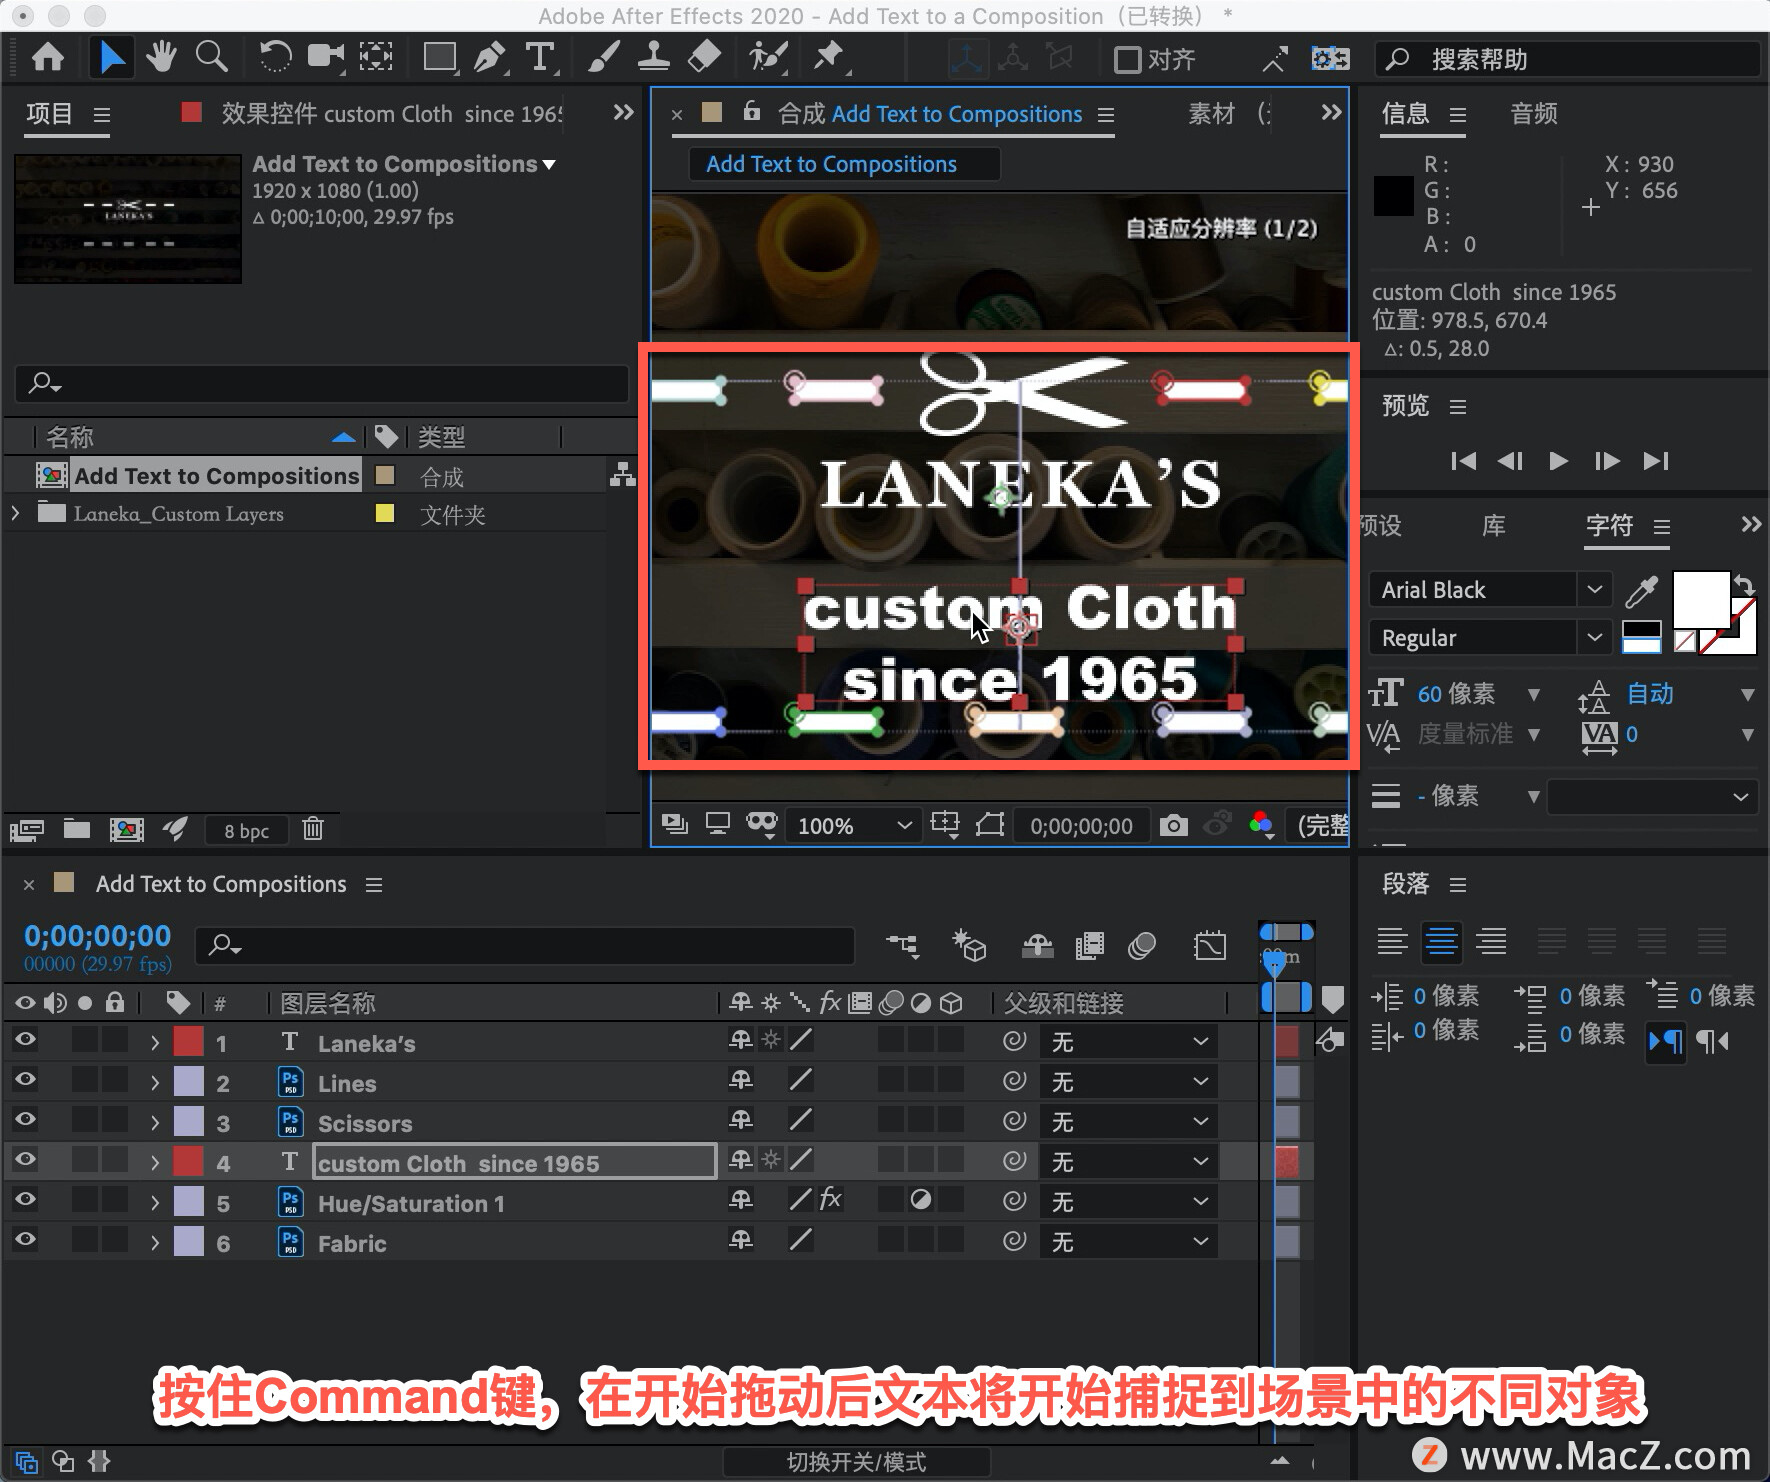 After Effects 教程「13」，如何在 After Effects 中将文本图层添加到合成？